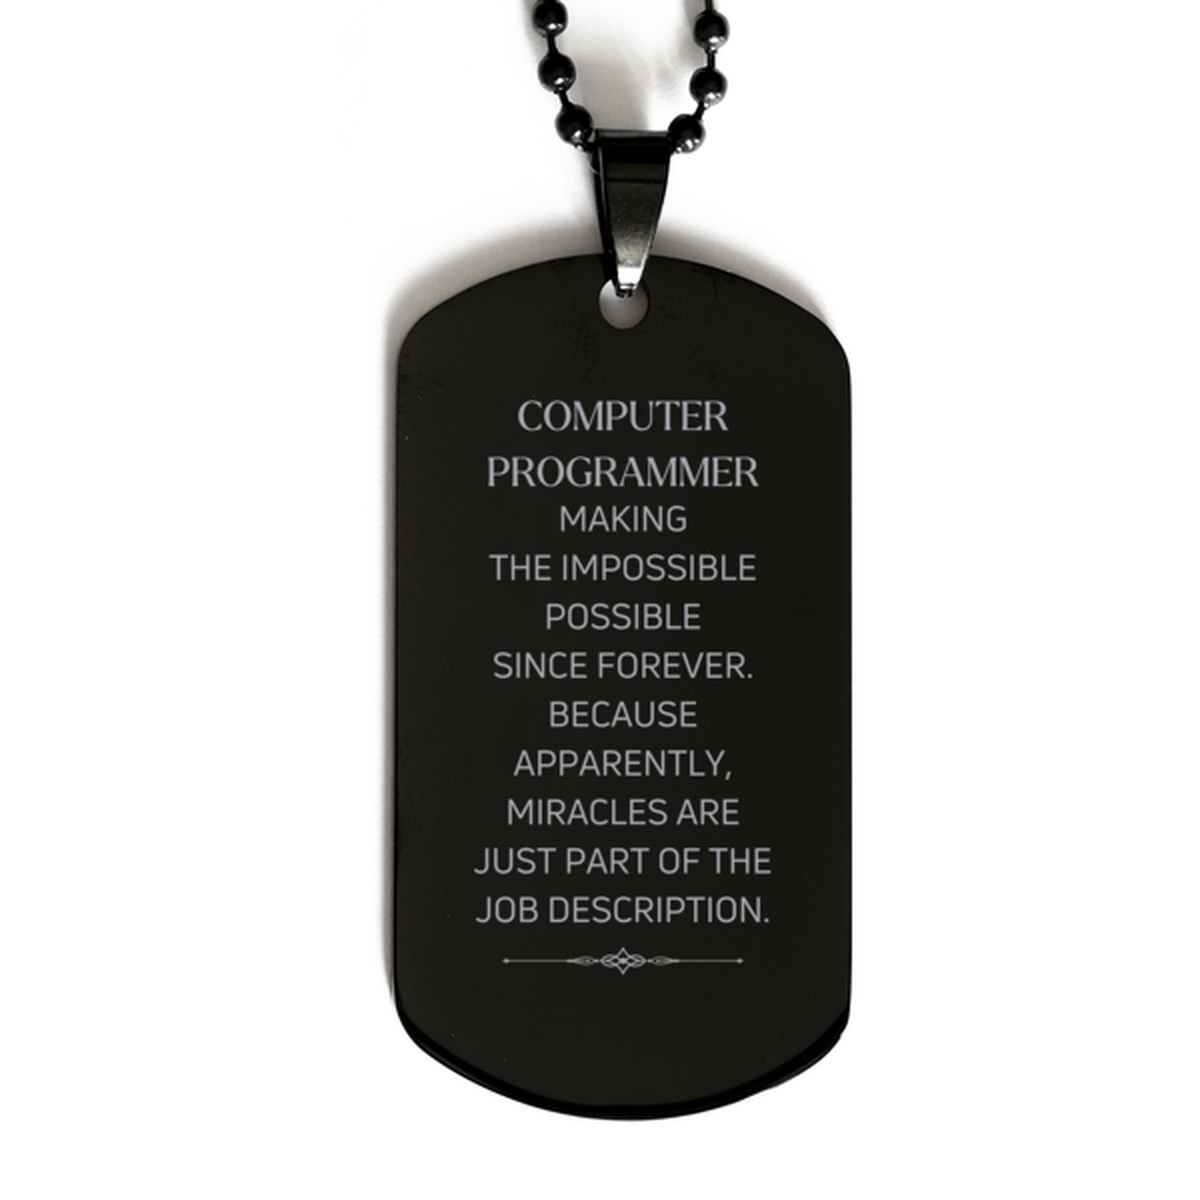 Funny Computer Programmer Gifts, Miracles are just part of the job description, Inspirational Birthday Black Dog Tag For Computer Programmer, Men, Women, Coworkers, Friends, Boss